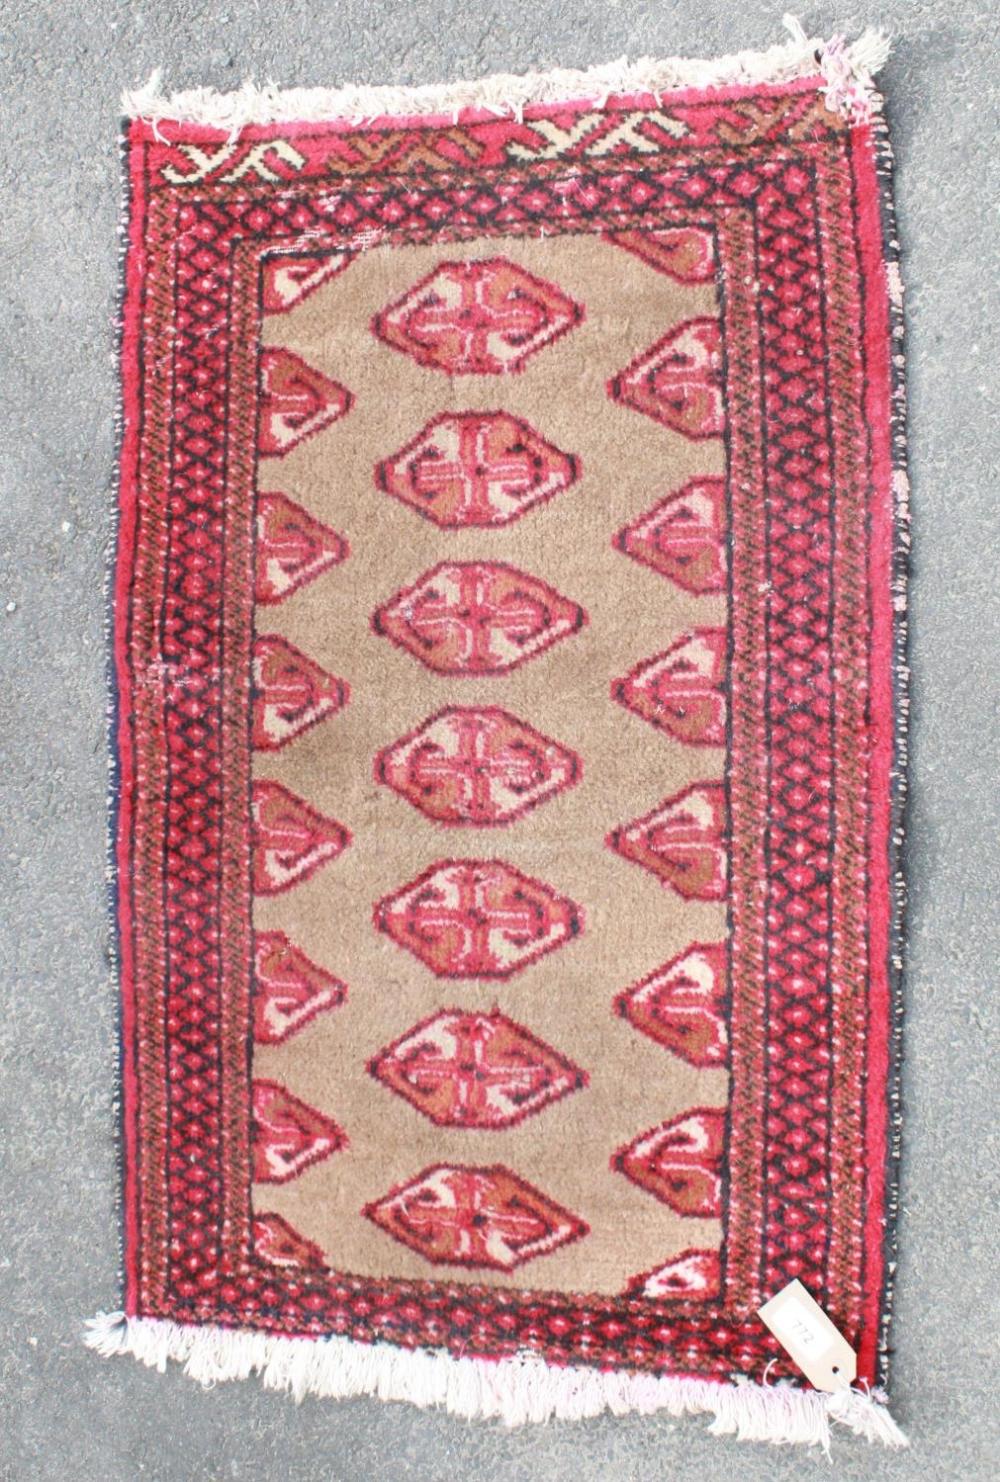 C20th Caucasian wool prayer rug, brown field with elephant's foot pattern, red geometric pattern